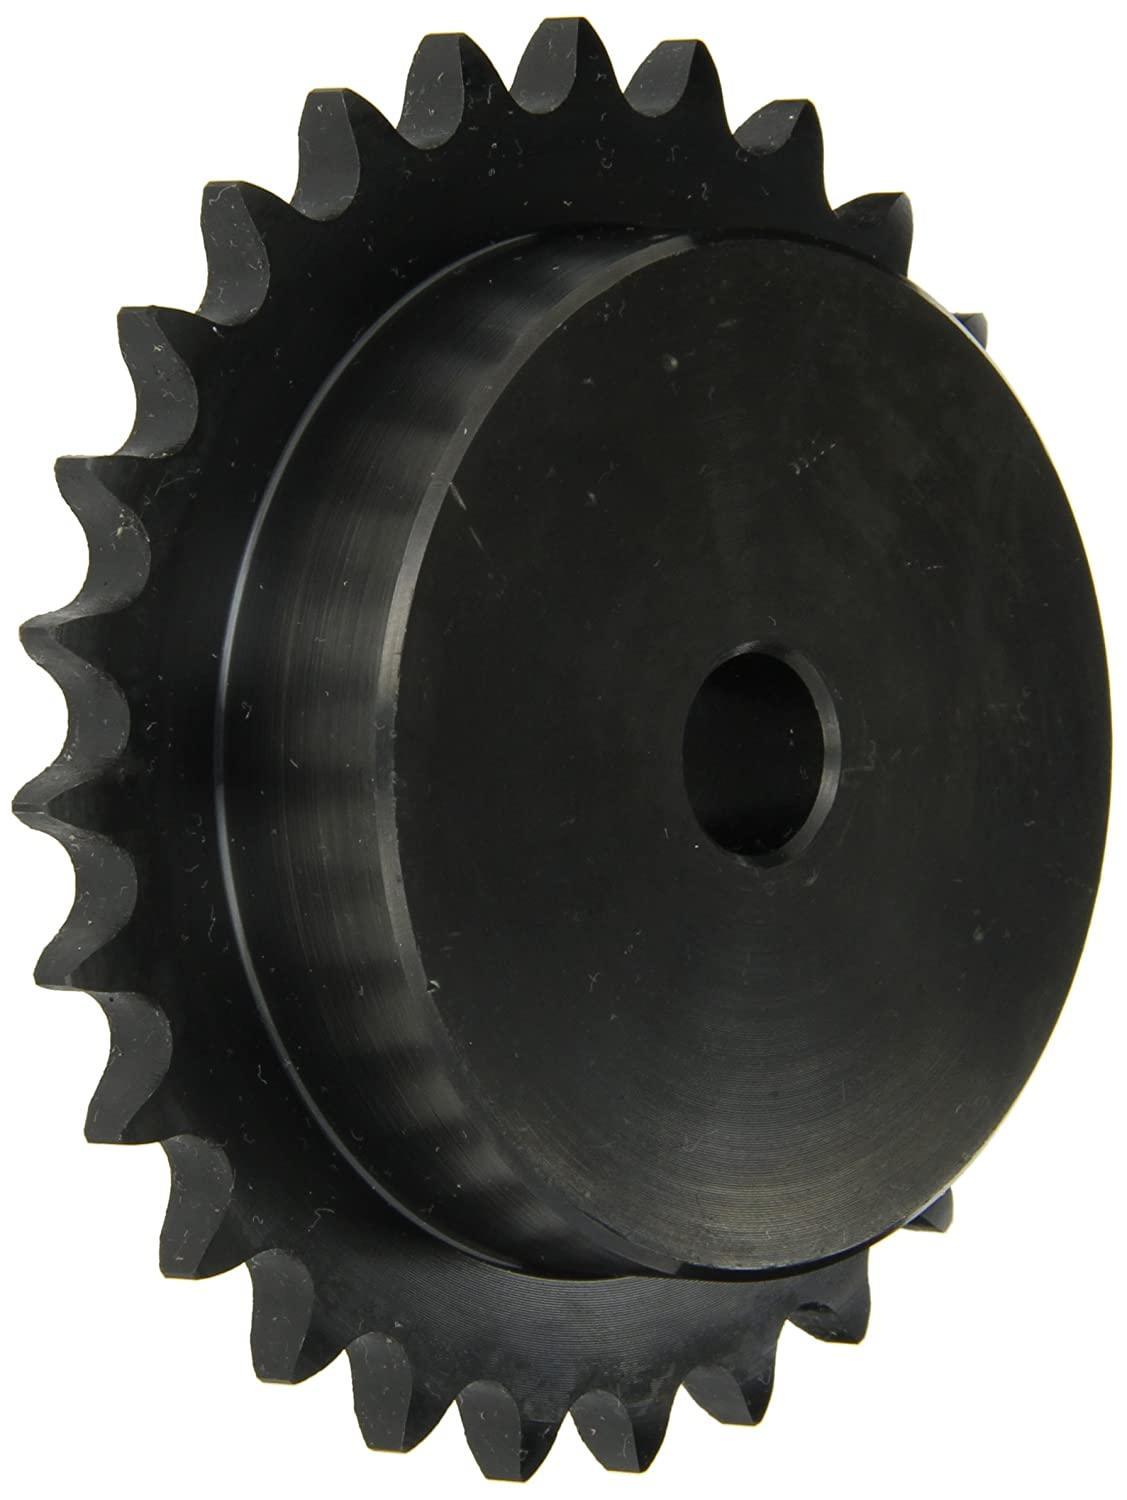 25B45 Roller Chain Sprocket With Stock Bore - Forces Inc